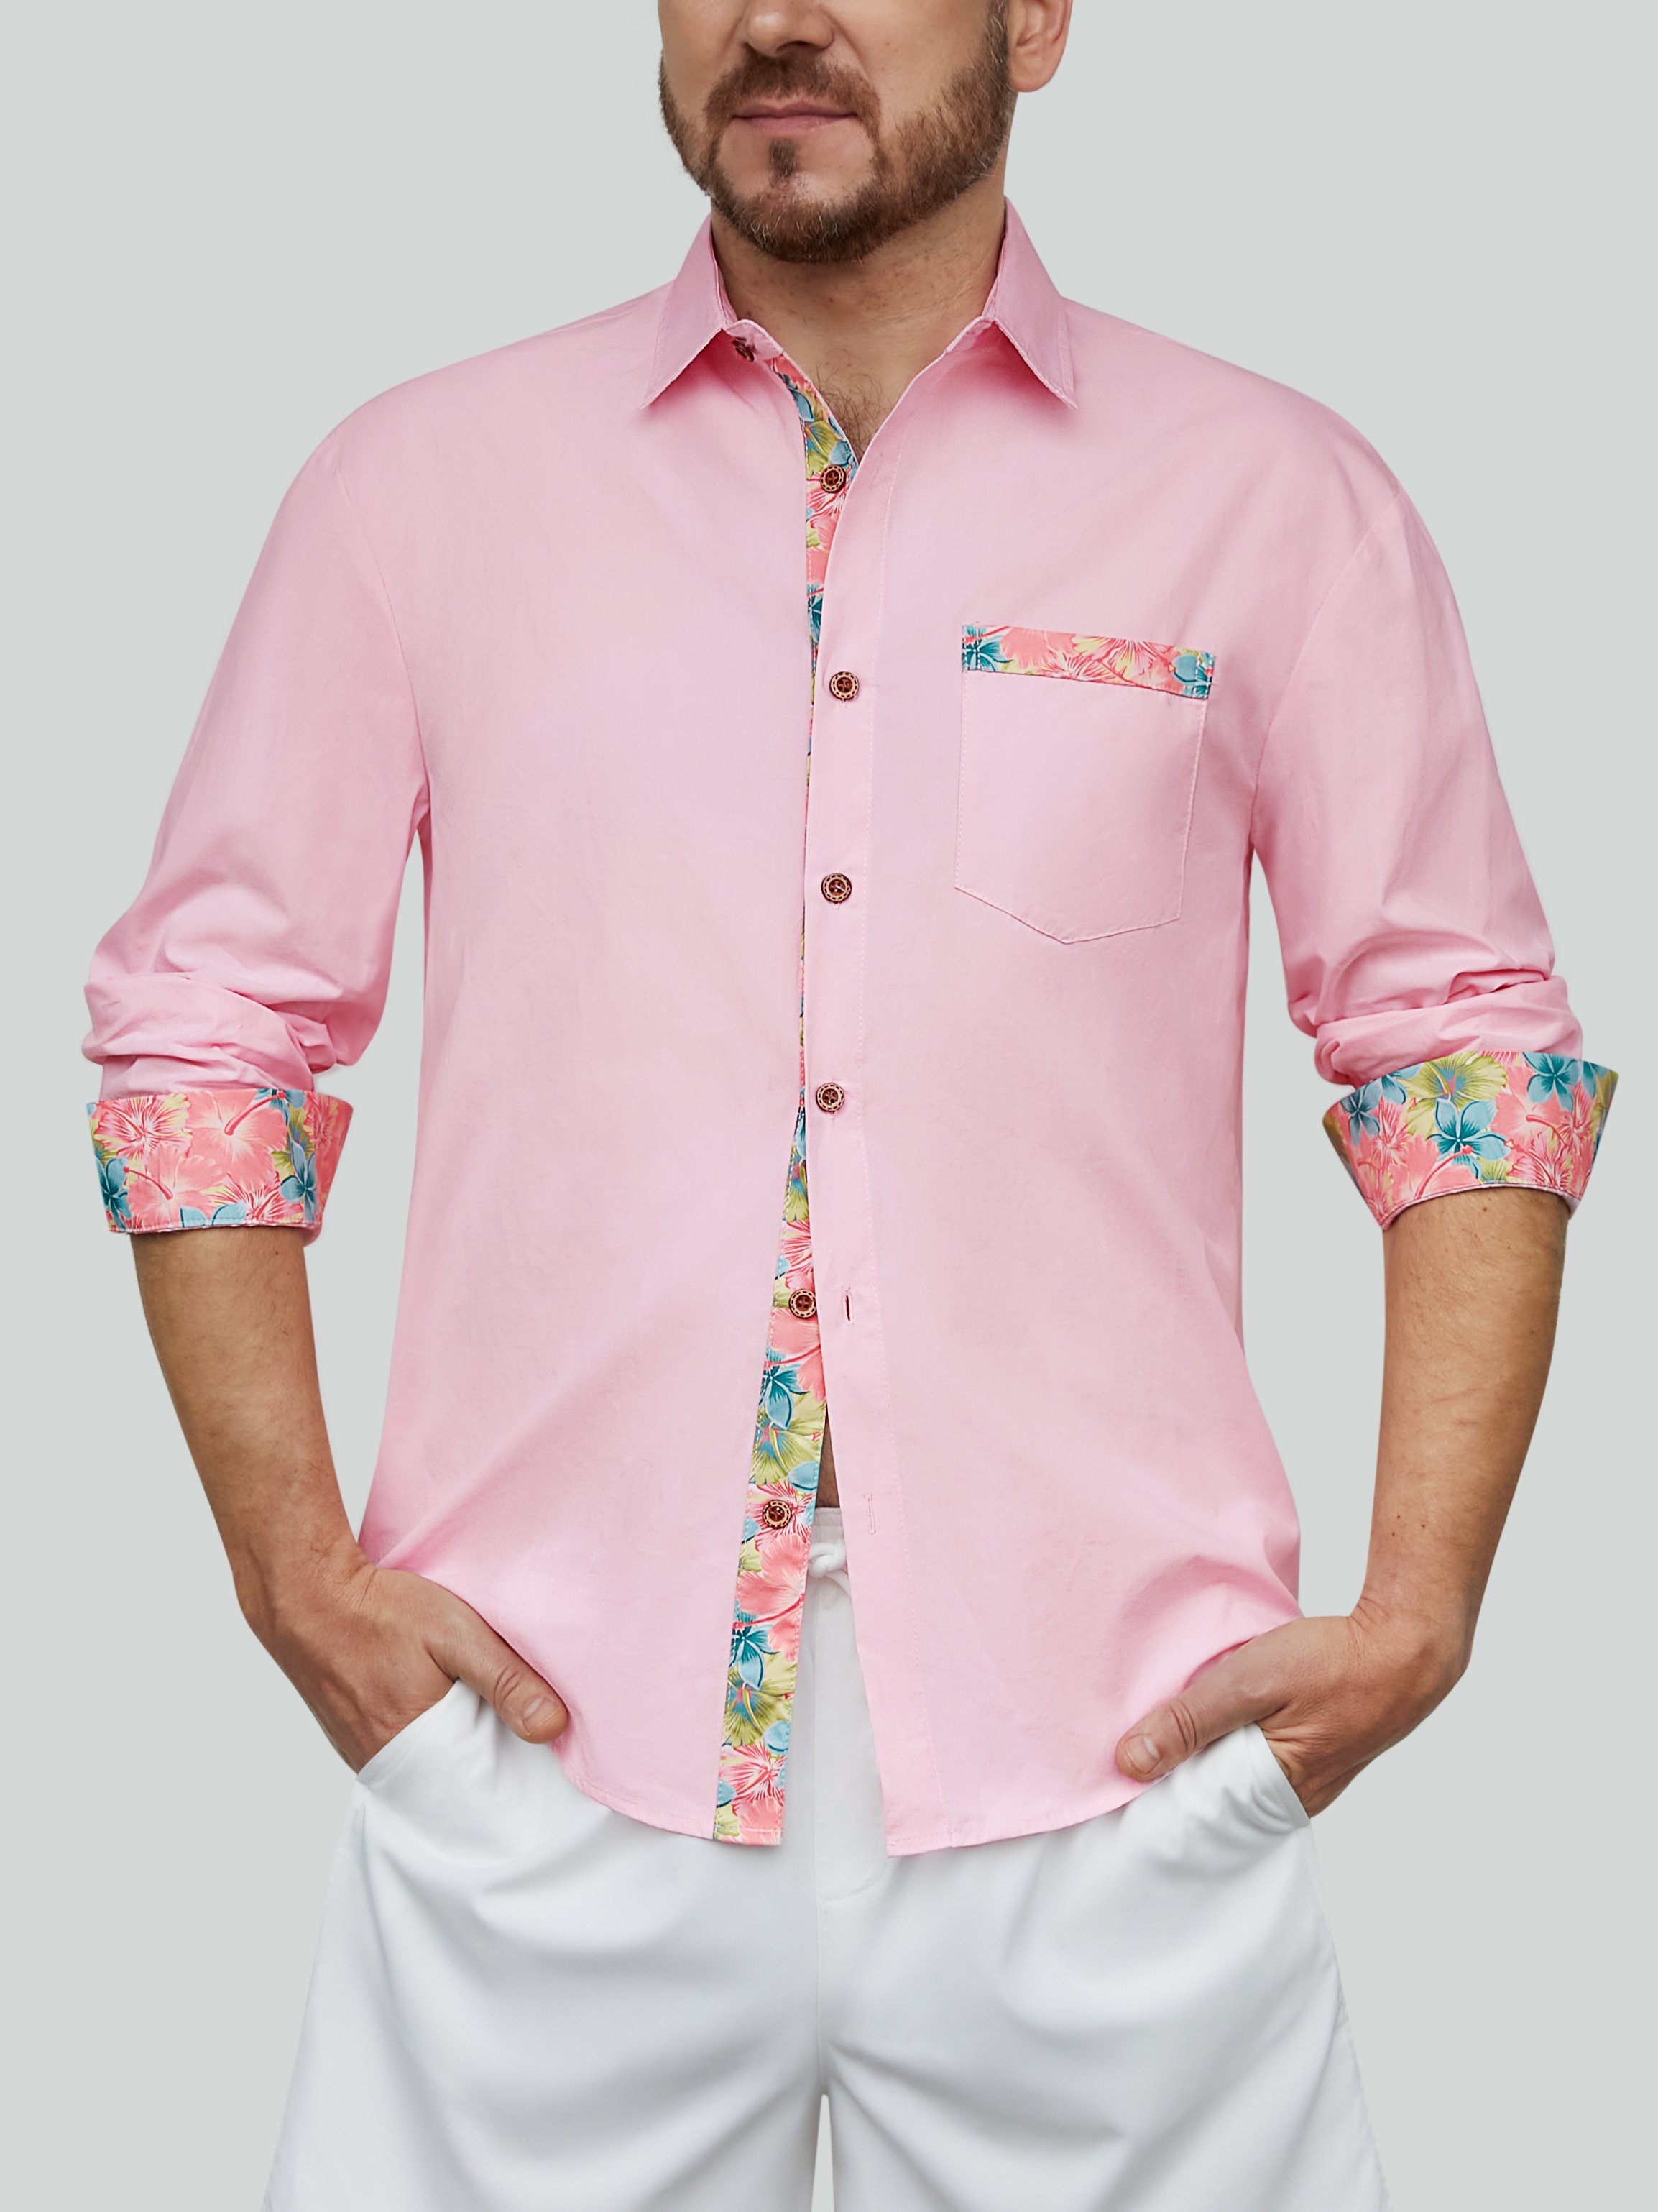 Cotton Paneling Floral Chest Pocket Long Sleeve Shirt